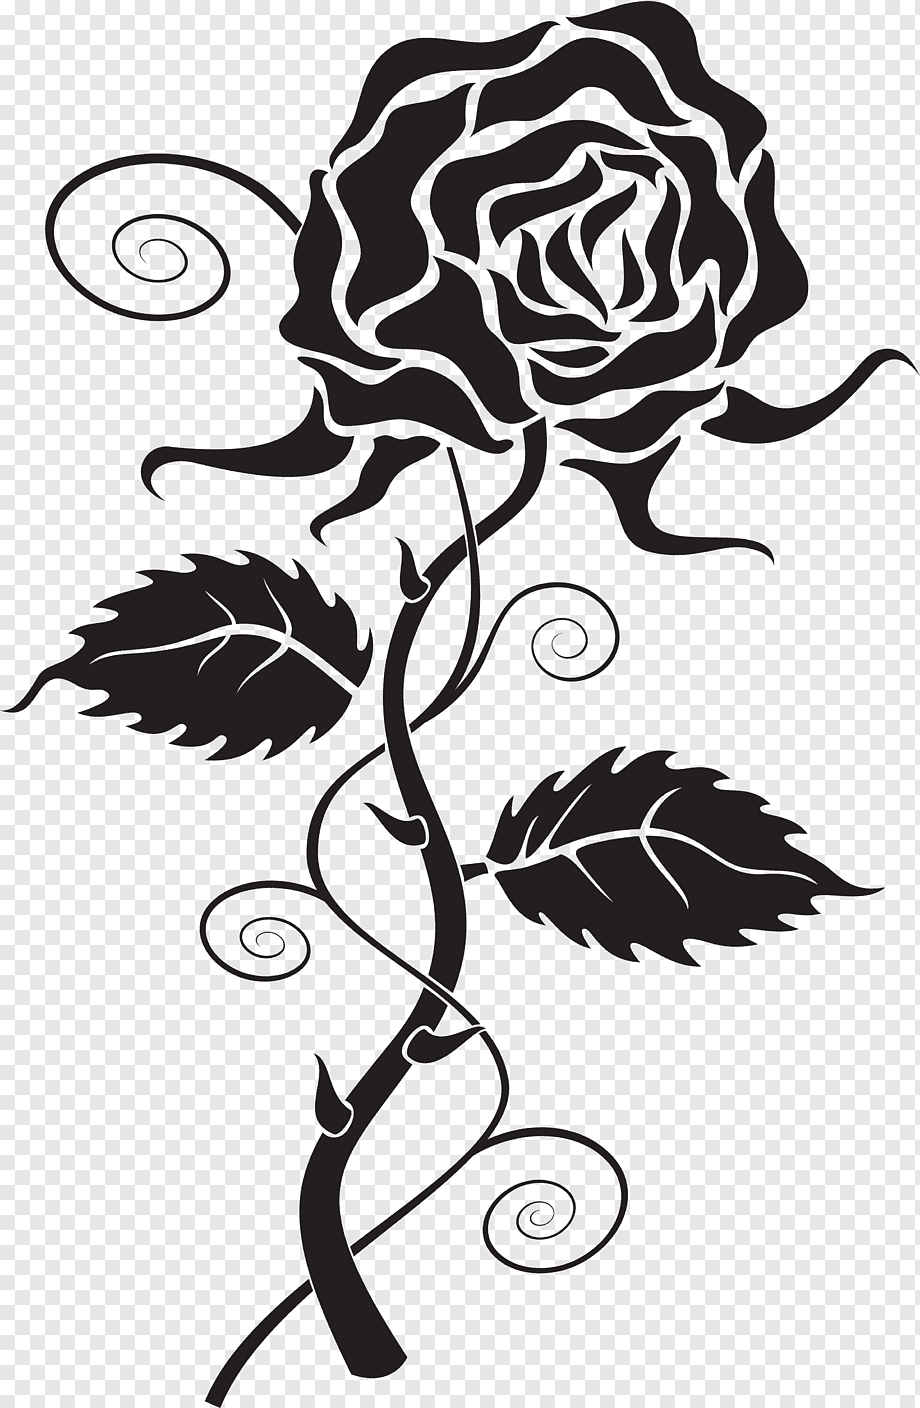 Silhouette Of Rose Royalty Free SVG, Cliparts, Vectors, and Stock